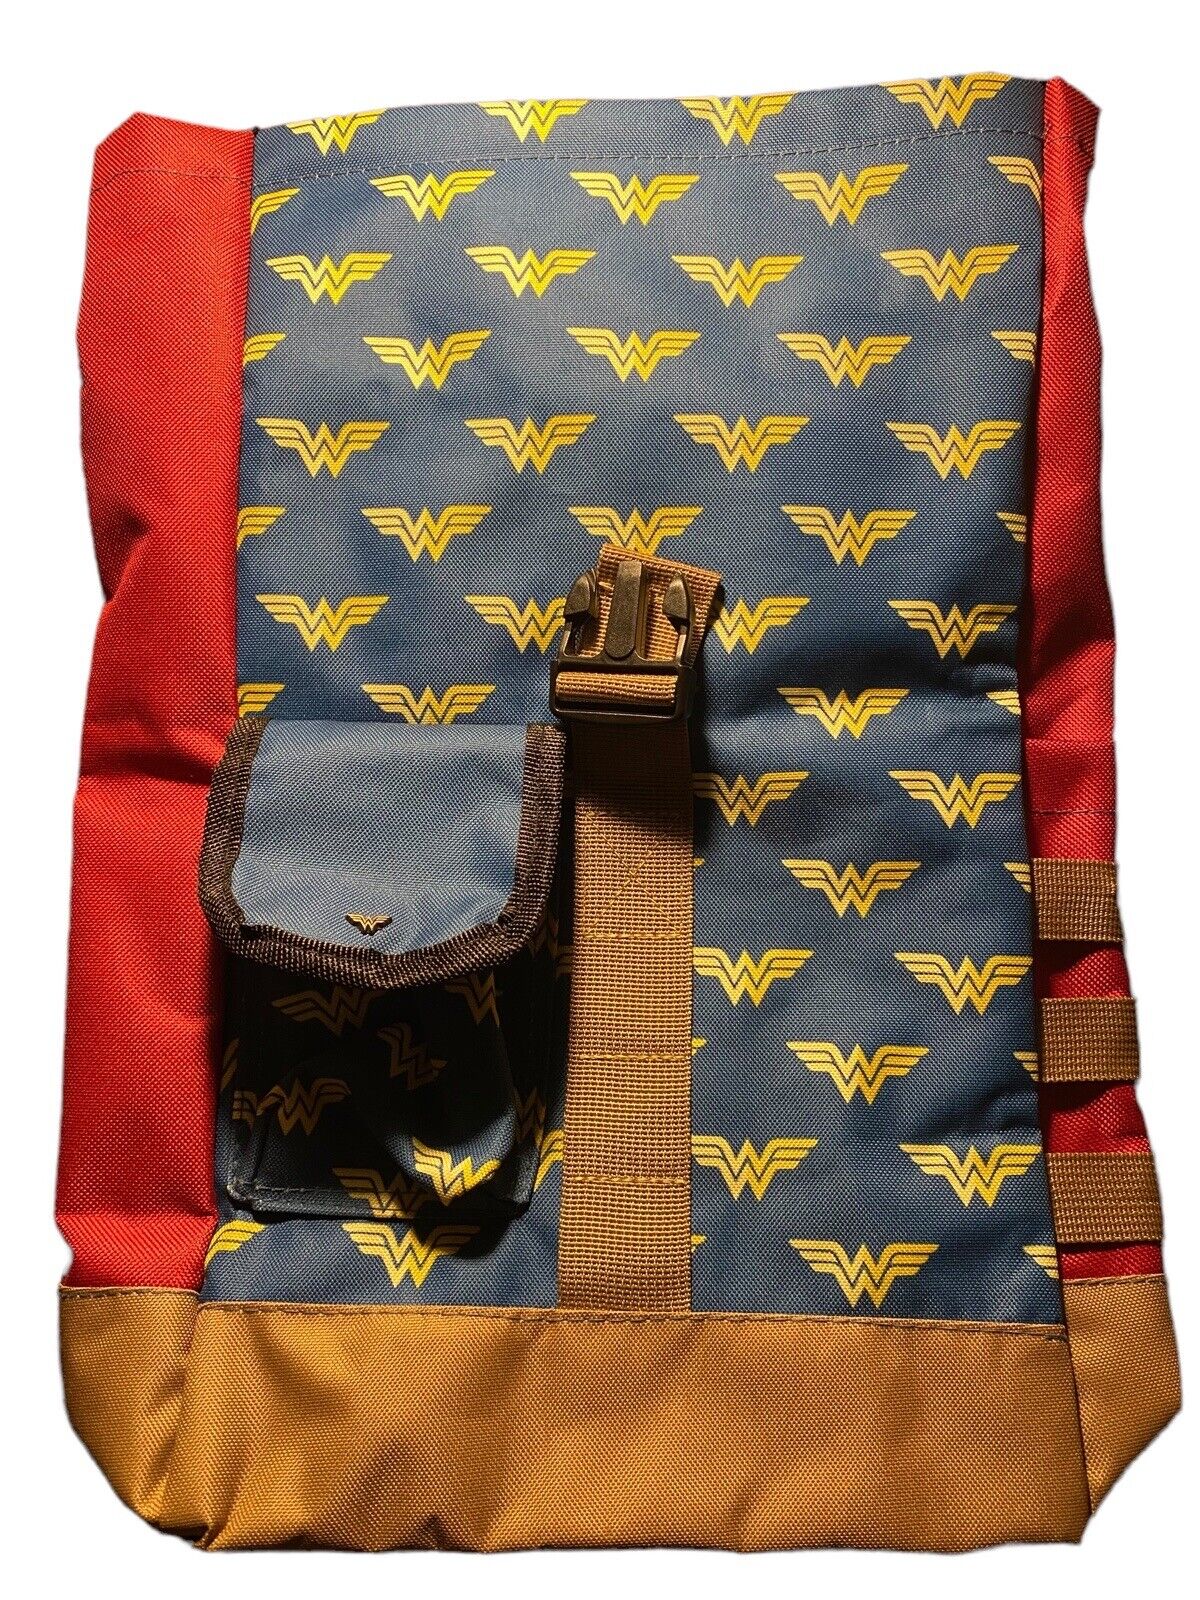 Wonder Woman Backpack Loot Crate DX Exclusive New DC WB 2021 Quality Bag